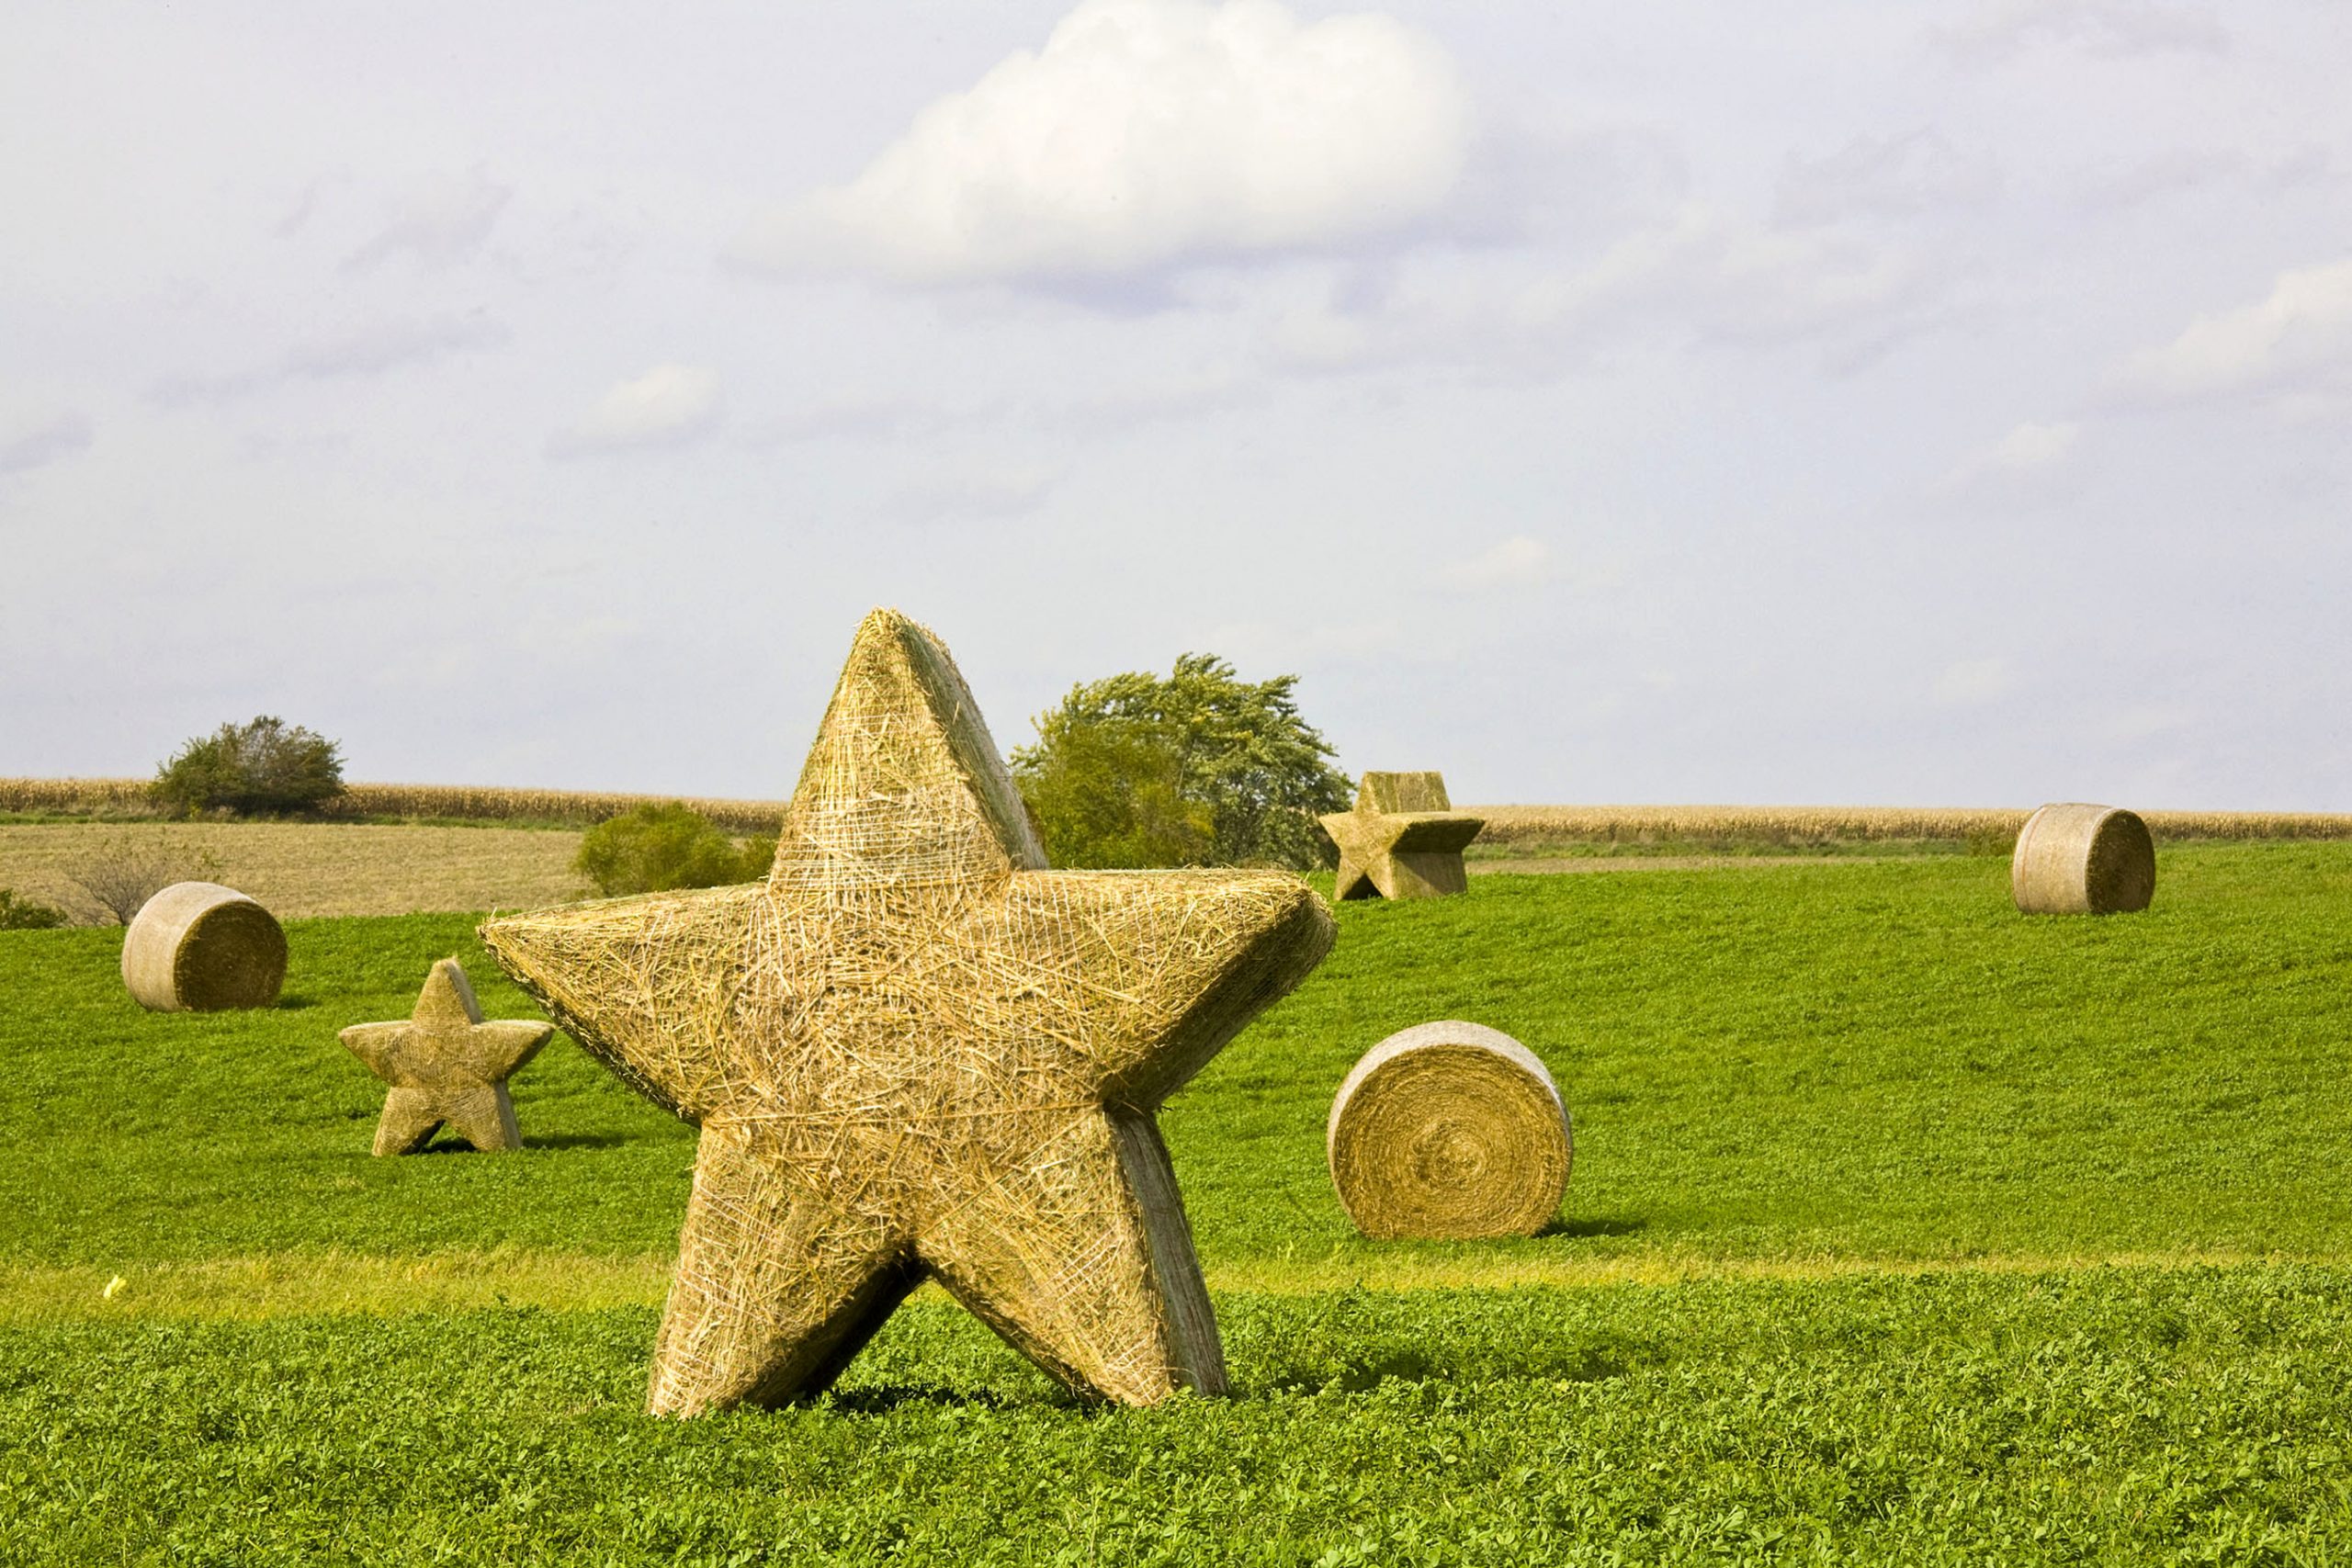 The Star Bales